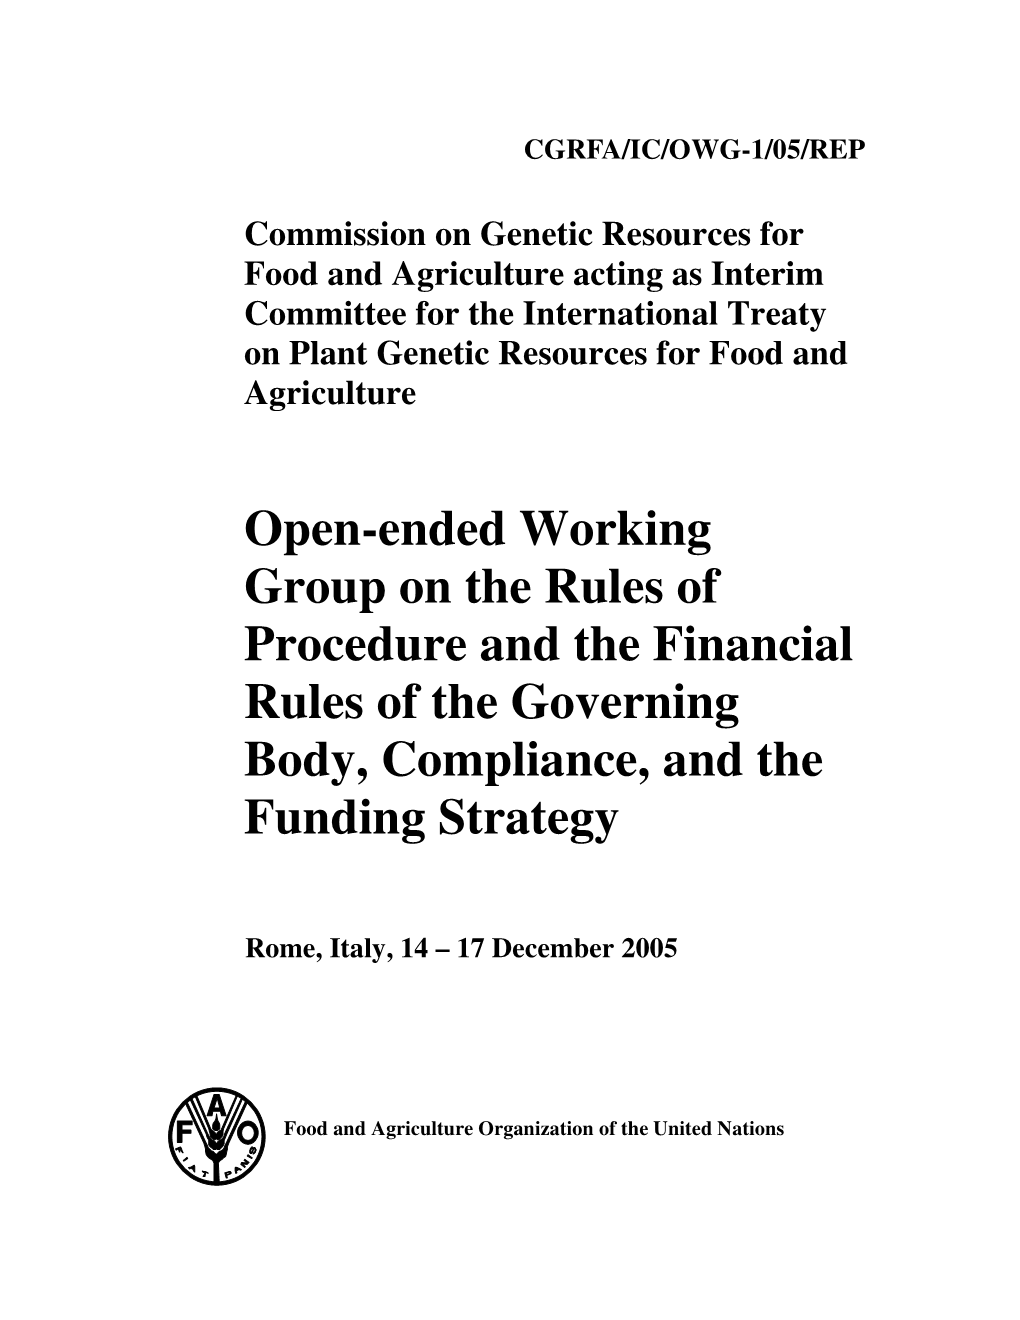 Governing Body for the International Treaty on Plant Genetic Resources for Food and Agriculture